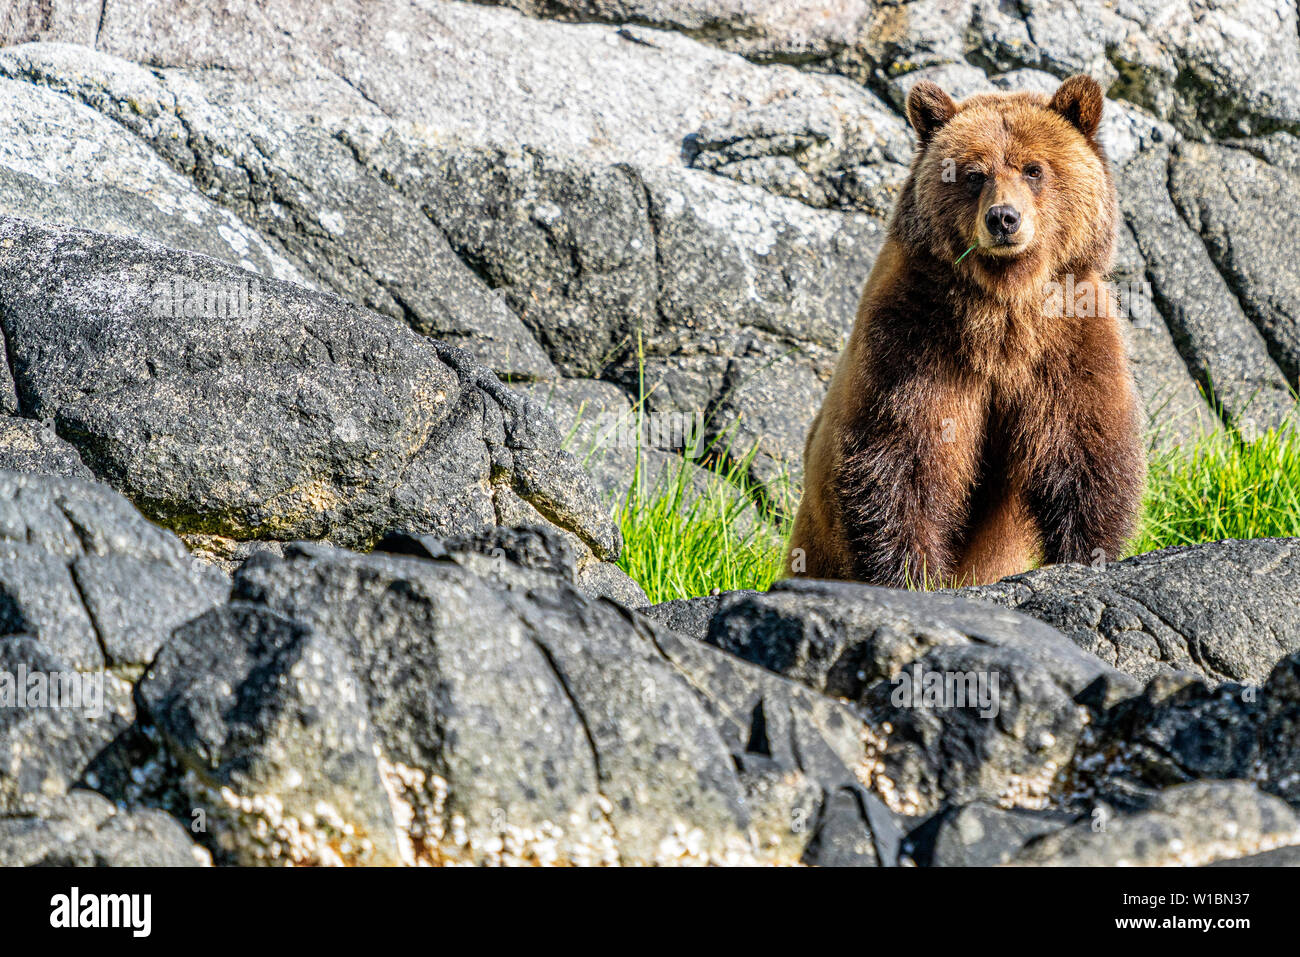 Cute grizzly bear eating grass along the Knight Inlet shoreline, Knight Inlet, First Nations Territory, Great Bear Rainforest, British Columbia Stock Photo